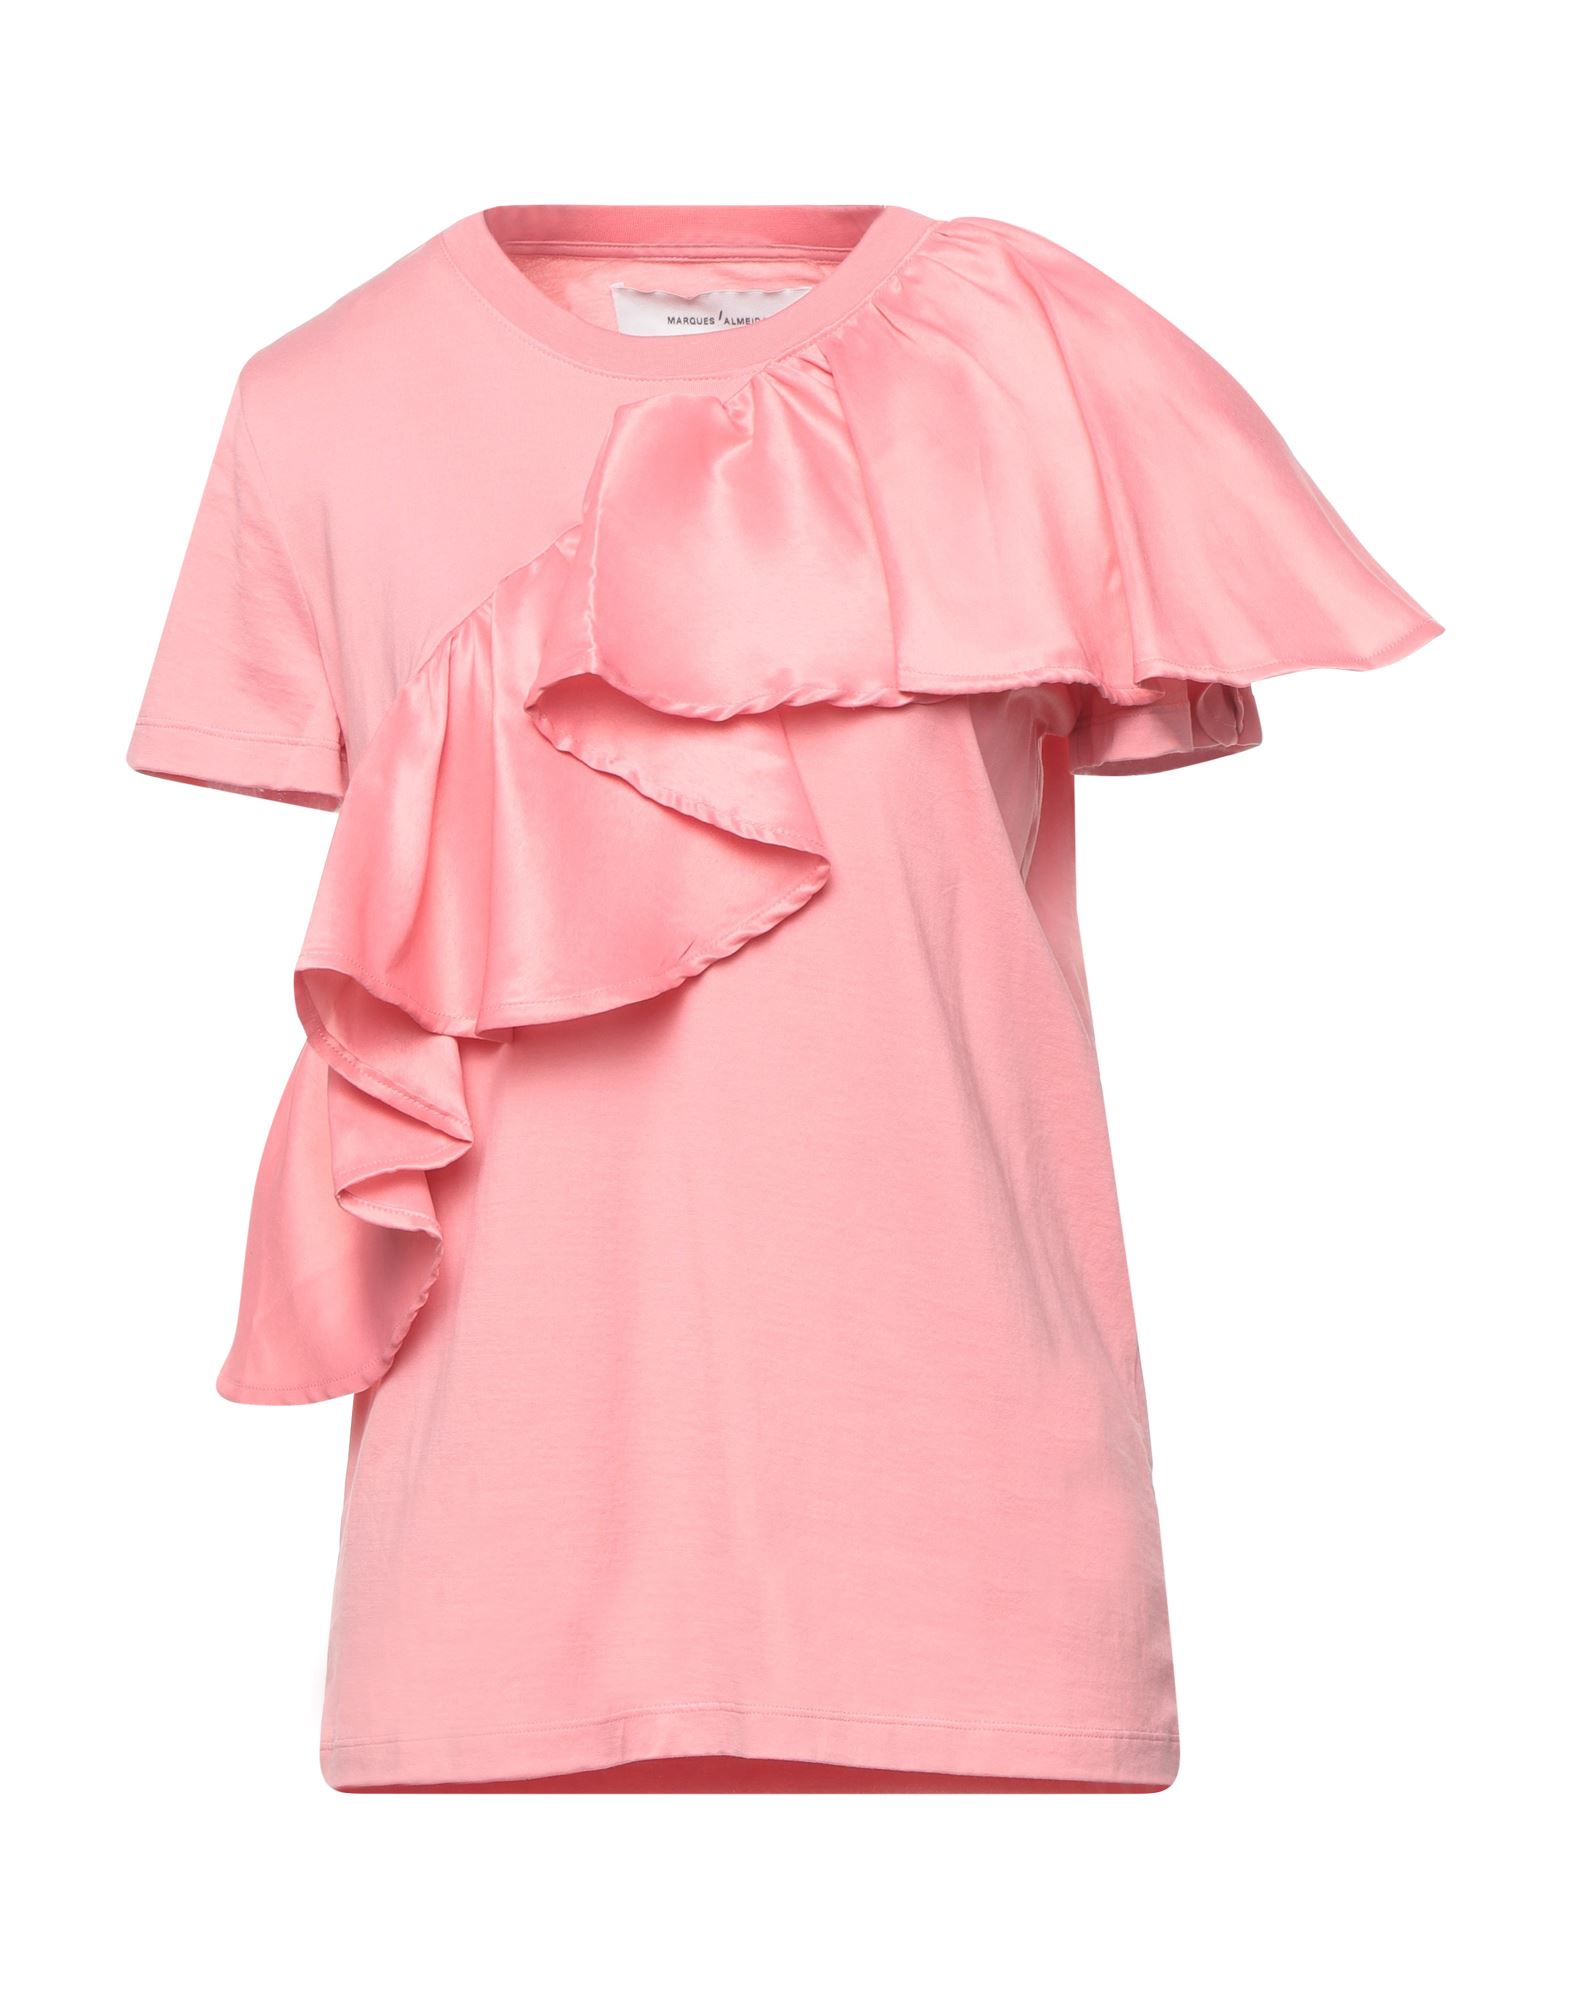 PINK TIE DYE T-SHIRT WITH SIDE FLAPS – MARQUES ' ALMEIDA